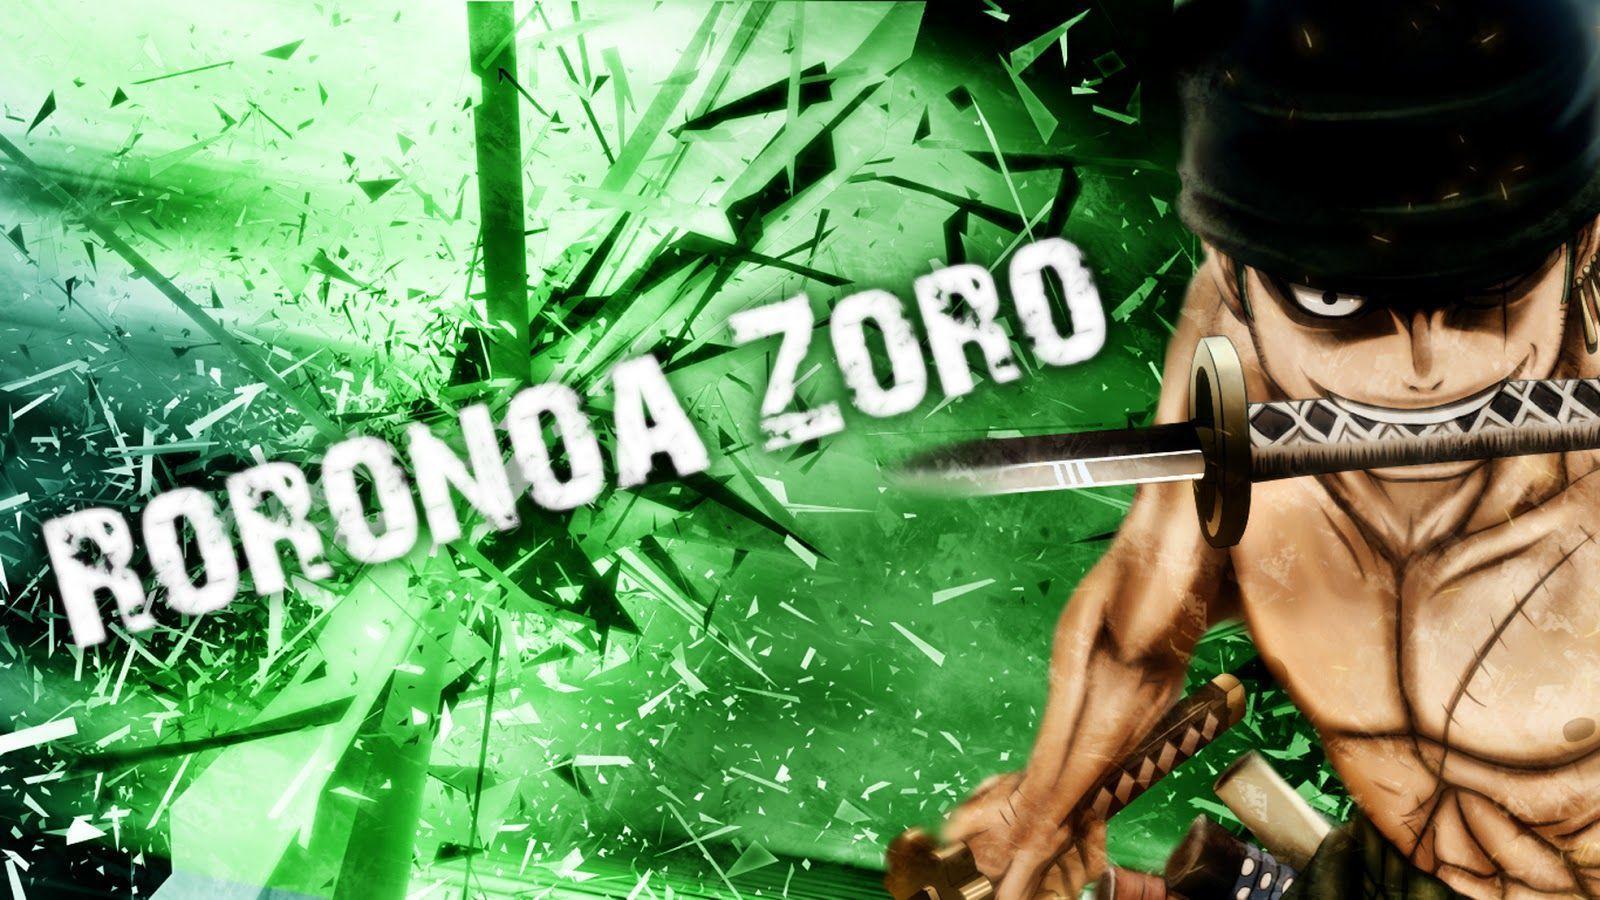 Wallpaper For > One Piece Wallpaper After 2 Years Zoro